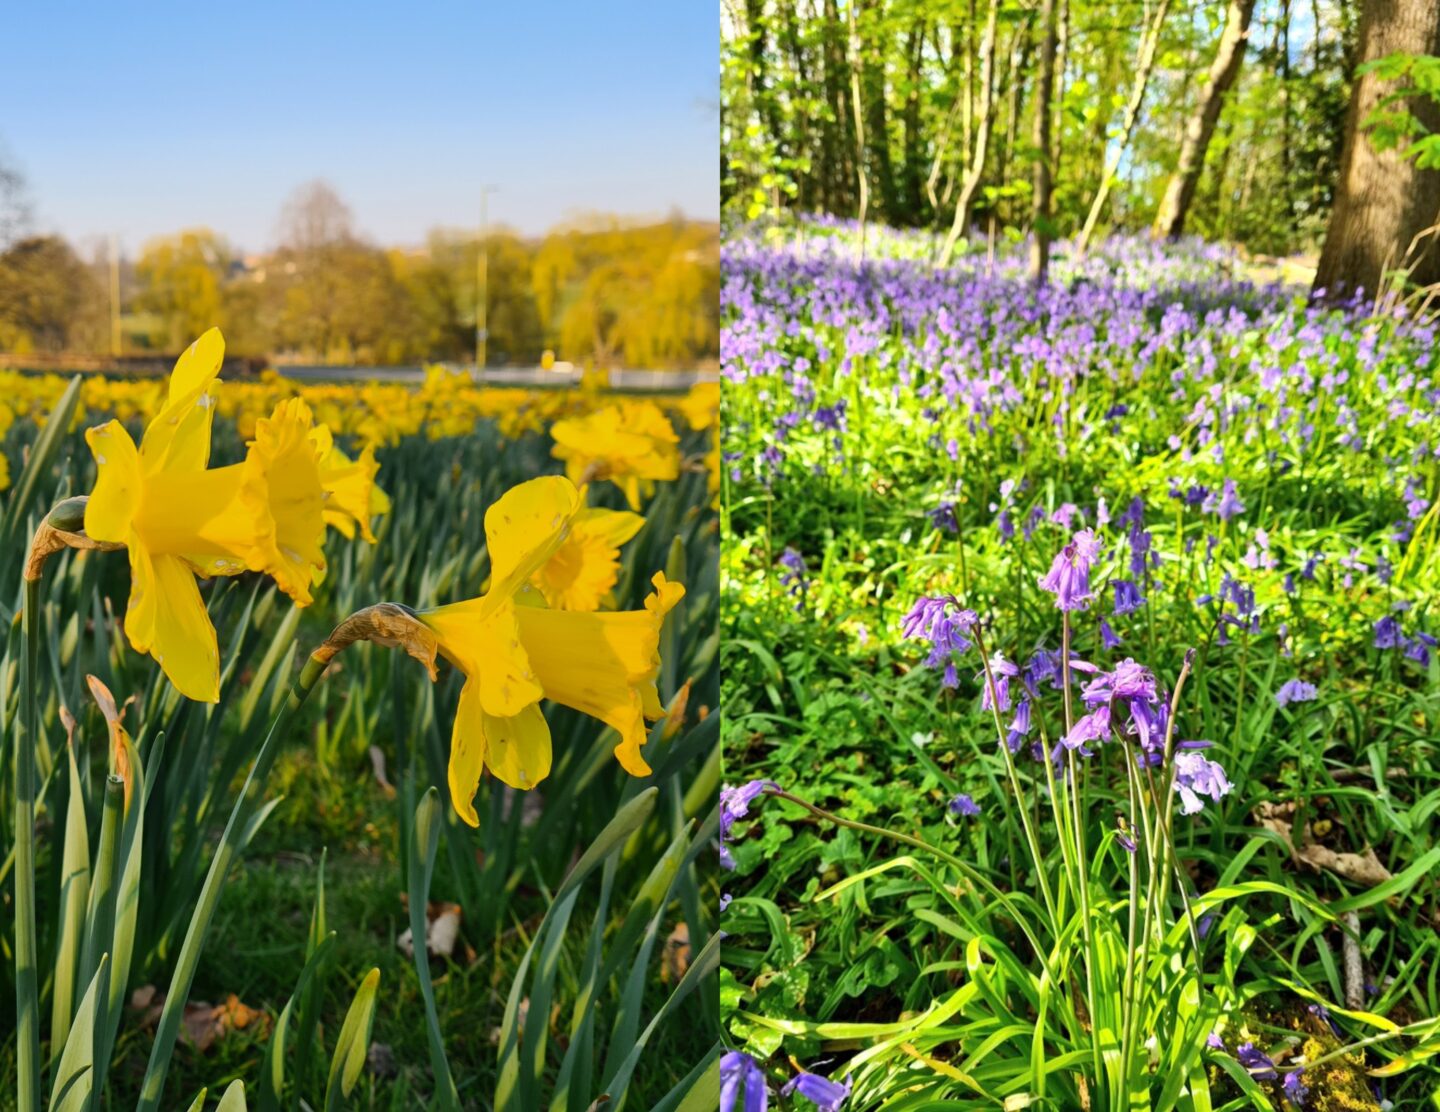 Daffodils and bluebells